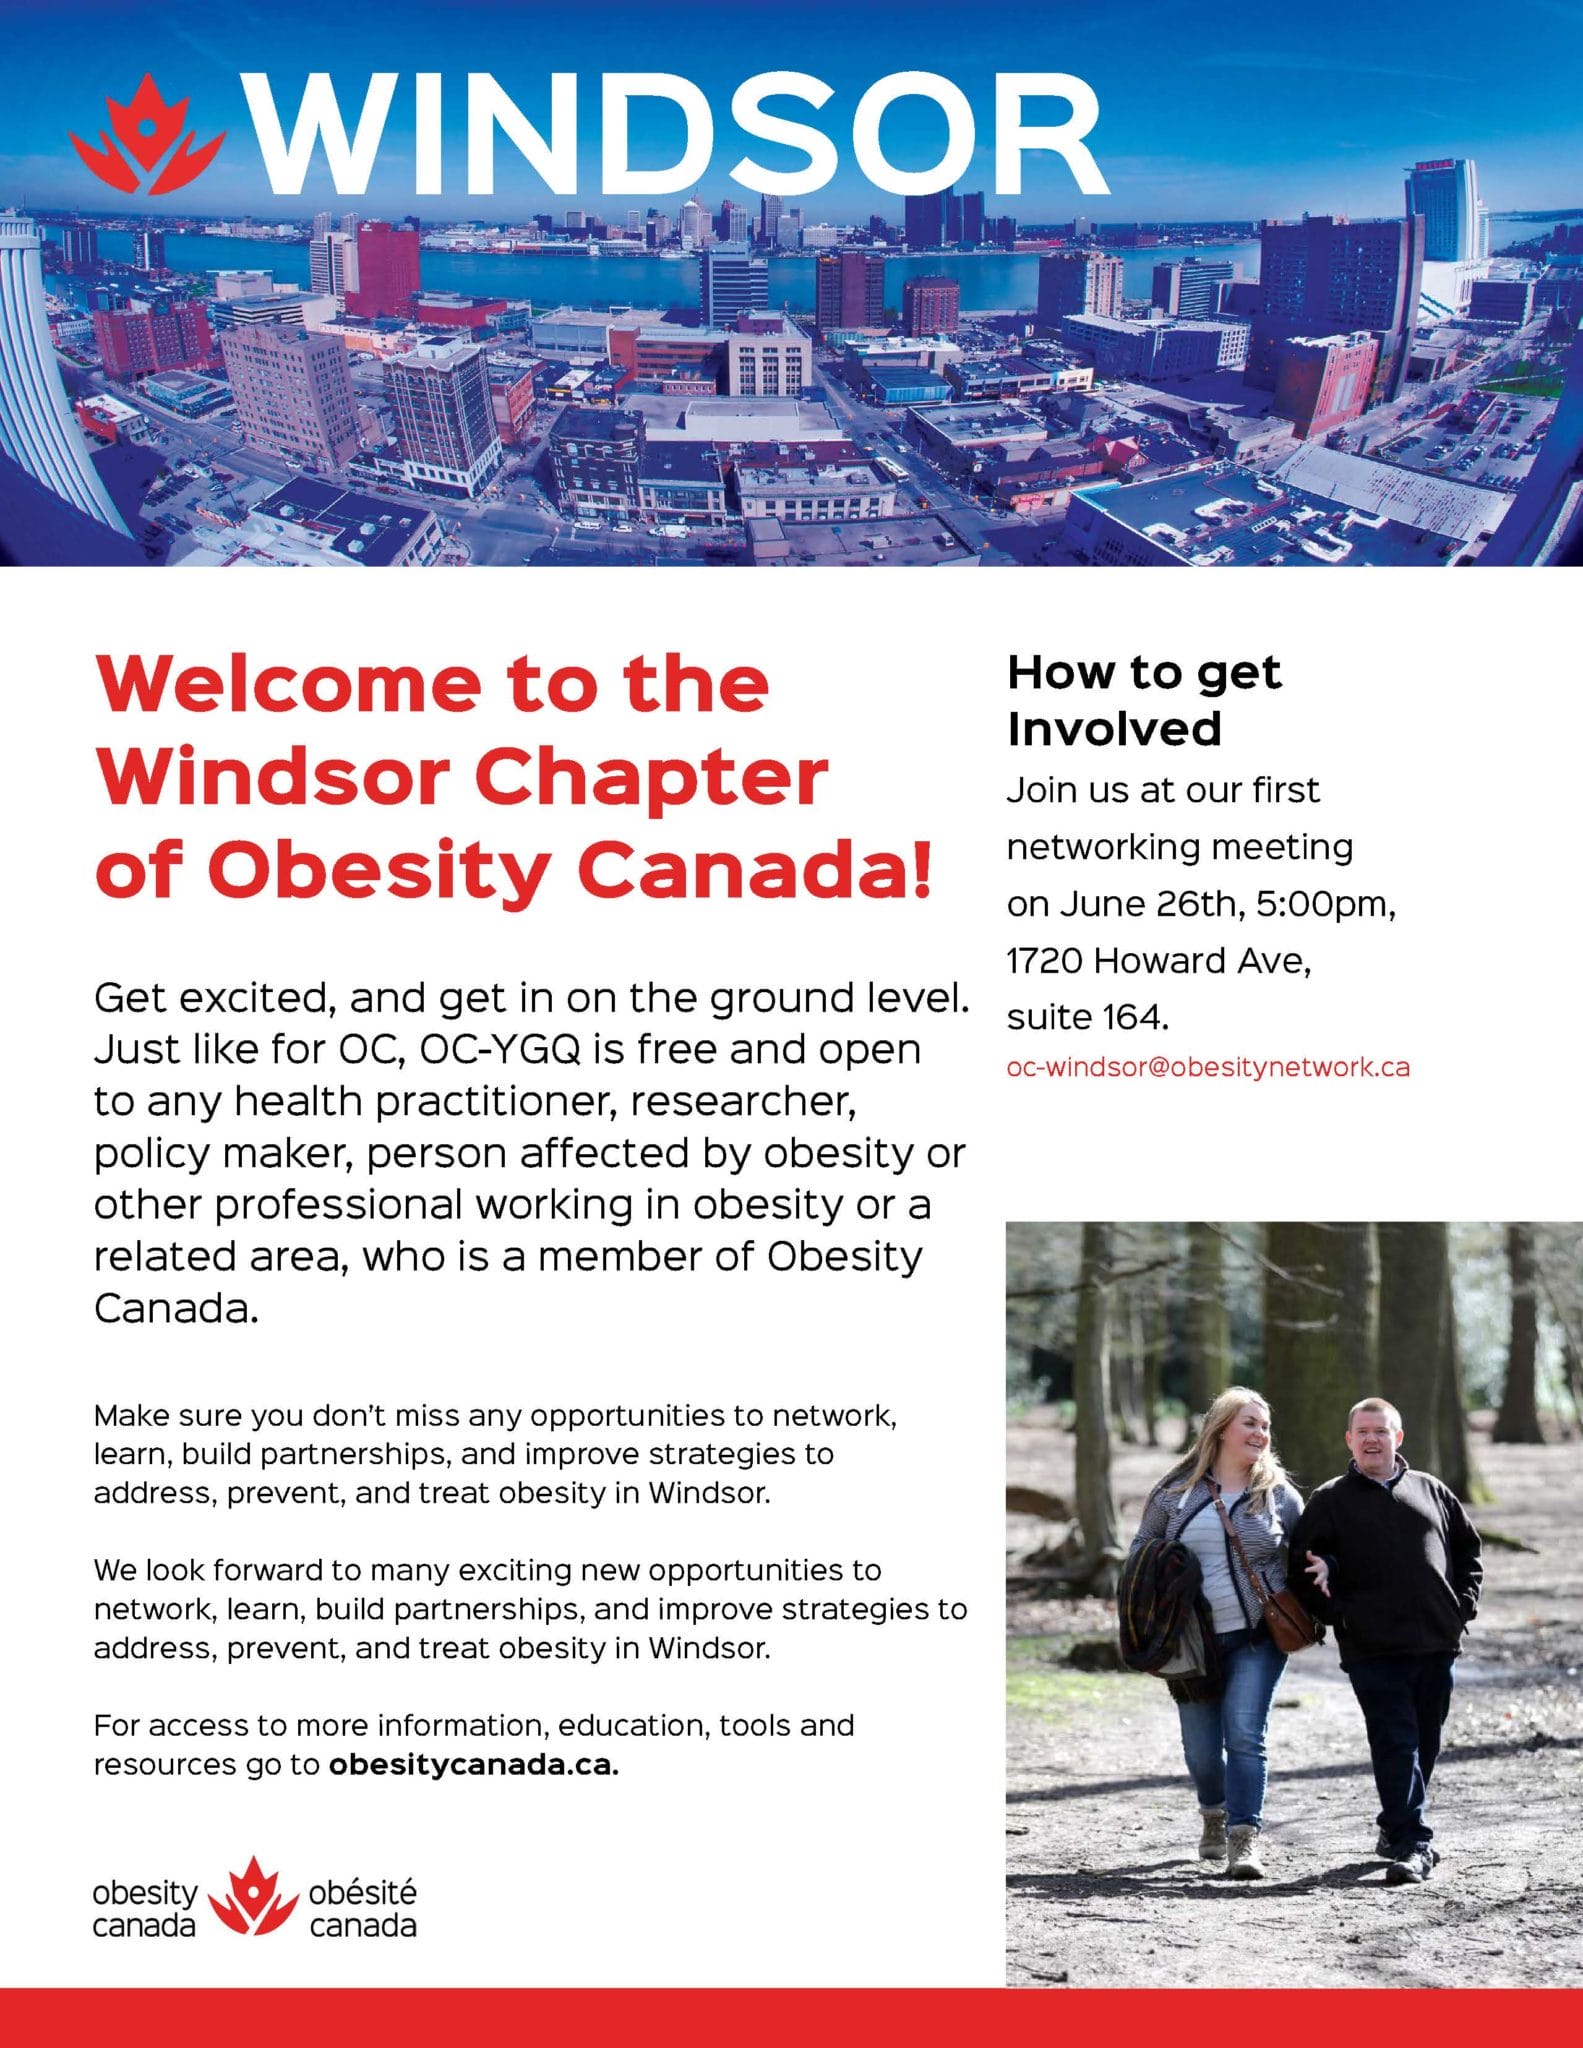 Promotional poster for the windsor chapter of obesity canada featuring an aerial view of windsor, event details, and organizational goals.